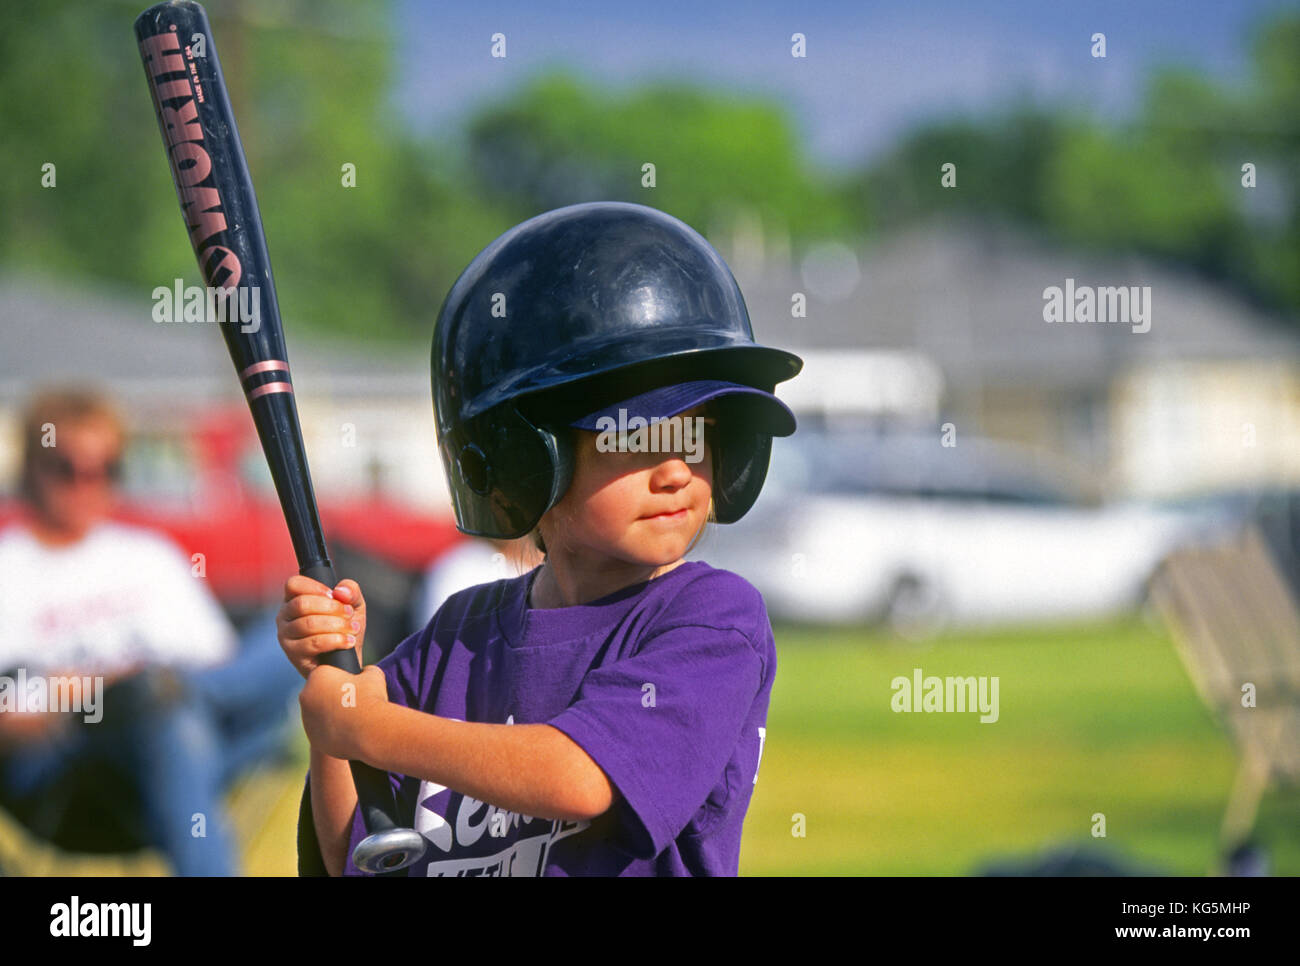 A young girl playing Little League Baseball, waits for a pitch from the pitcher. Stock Photo